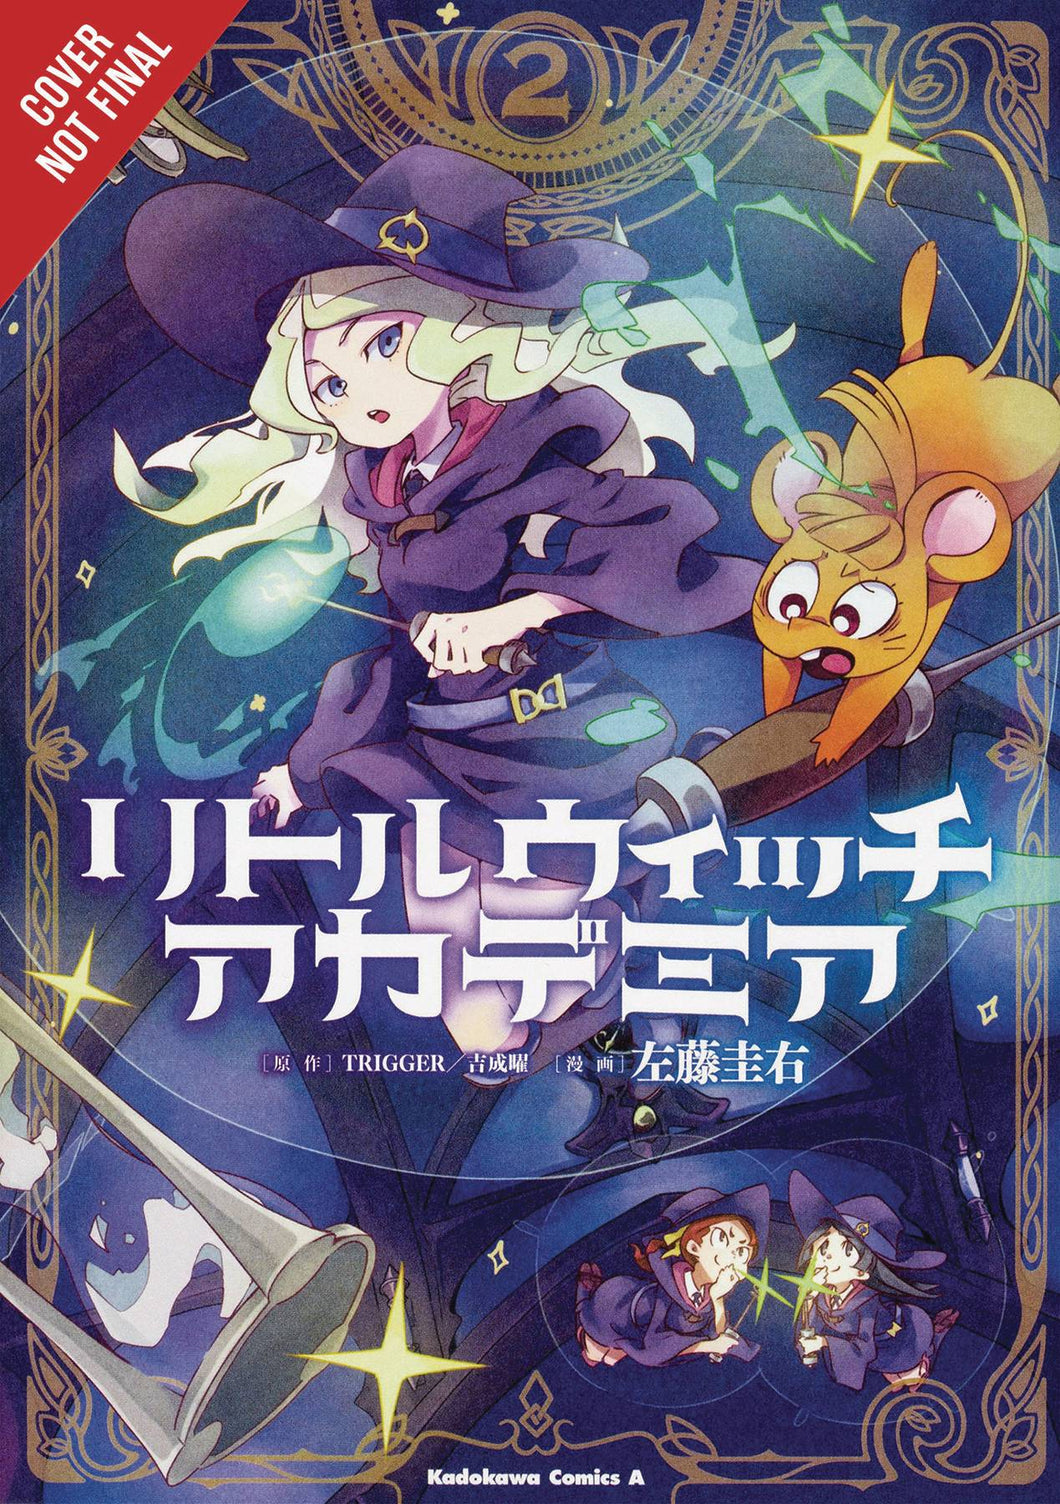 Little Witch Academia Gn Vol 02